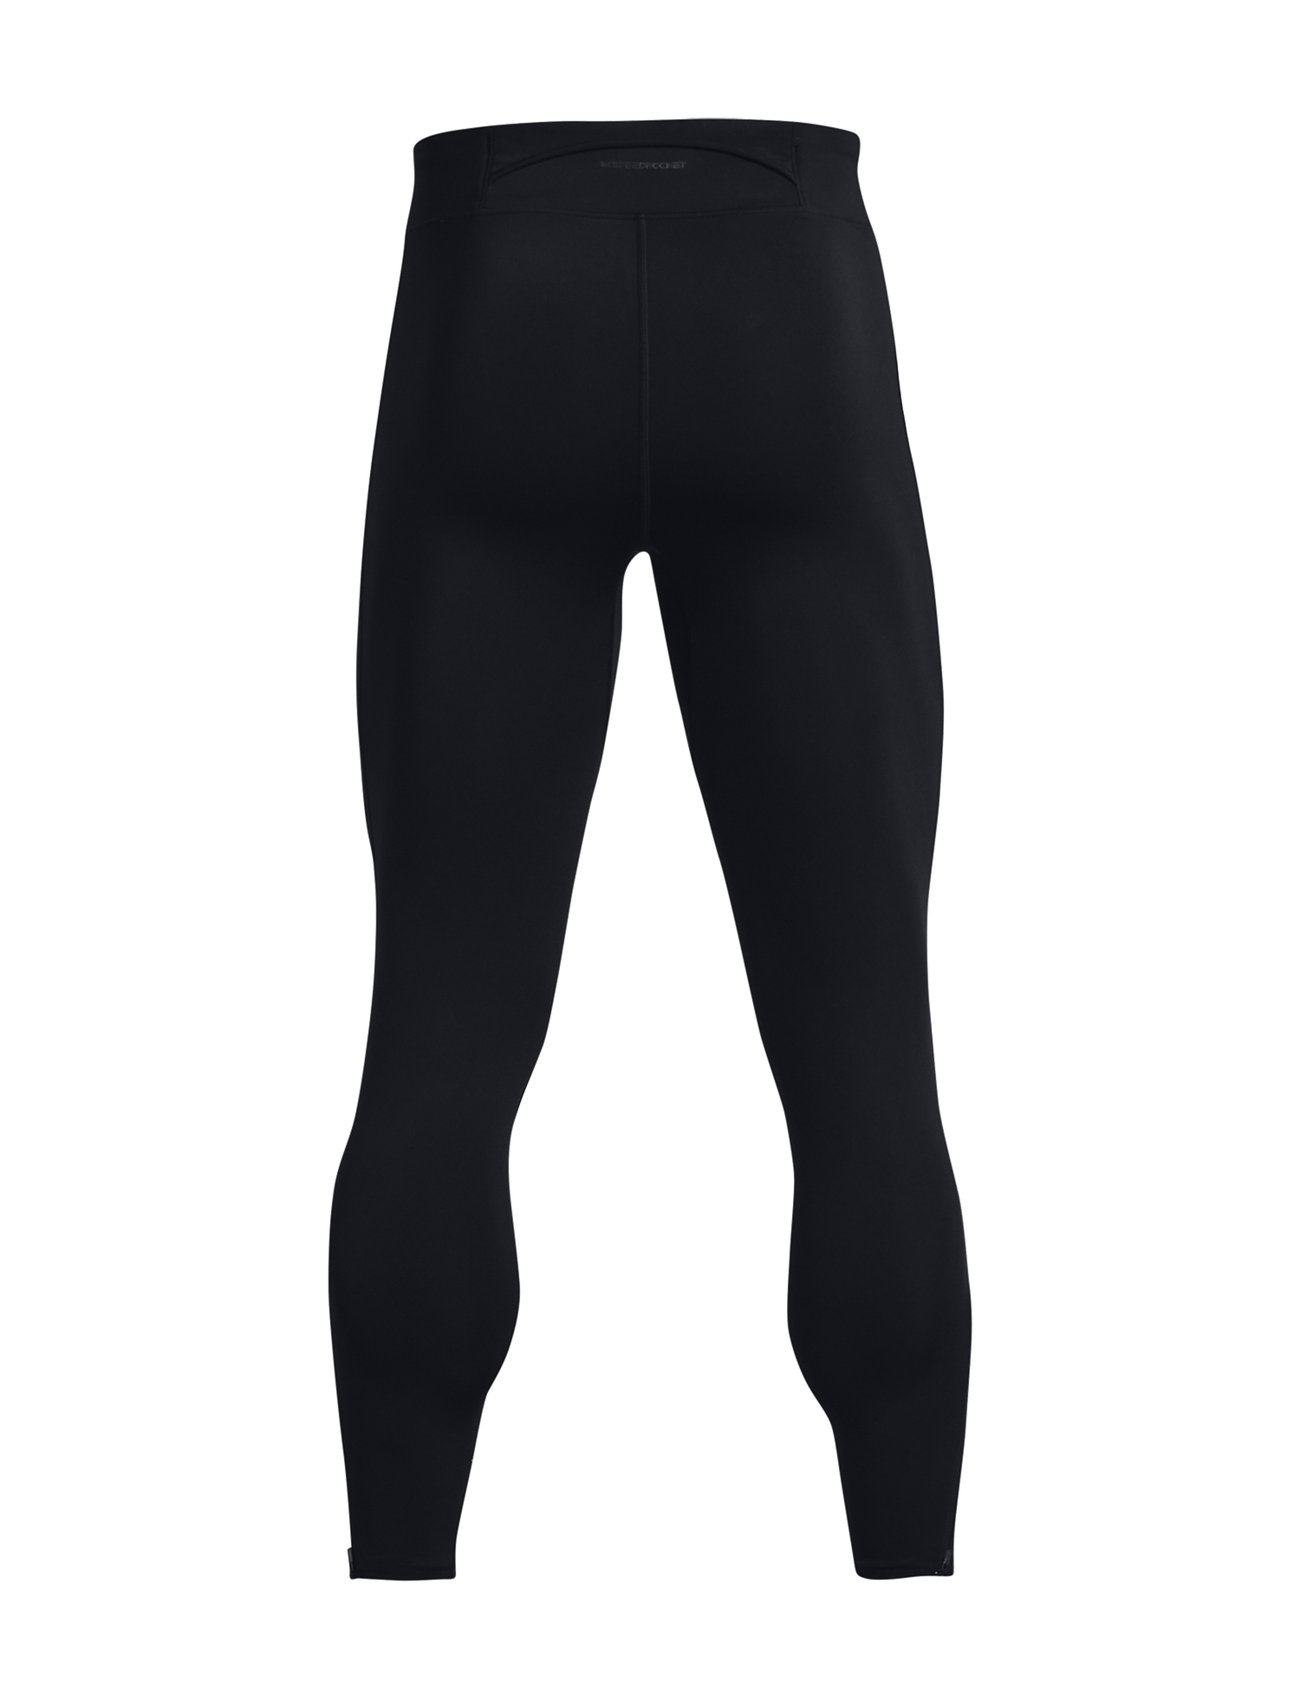 Ua Launch Pro Tights Sport Running-training Tights Black Under Armour